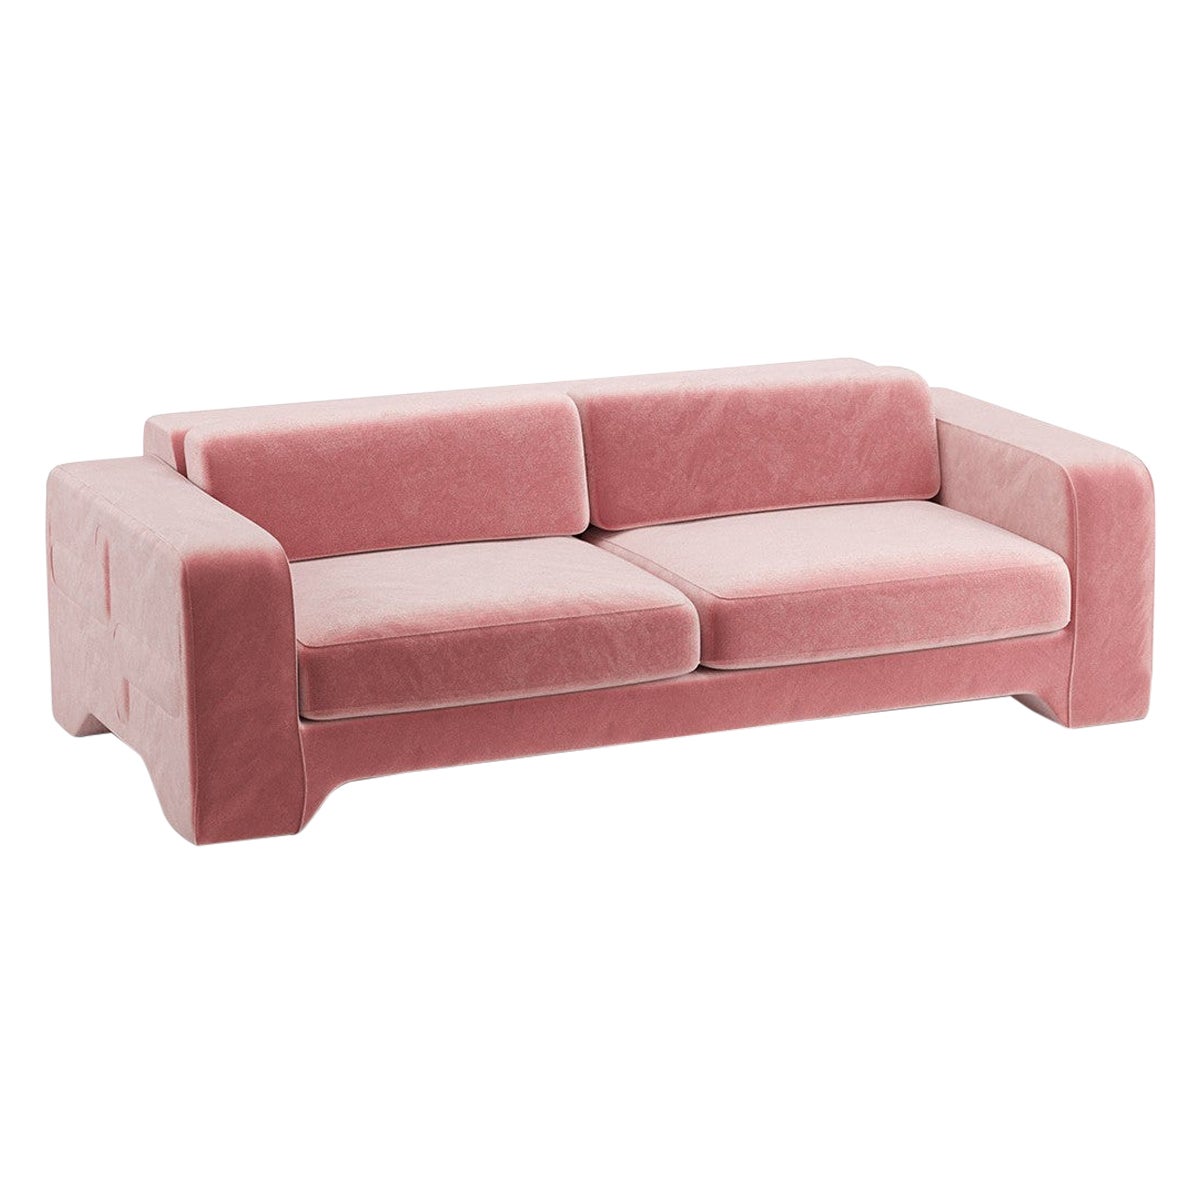 Popus Editions Giovanna 2.5 Seater Sofa in Pink Verone Velvet Upholstery For Sale